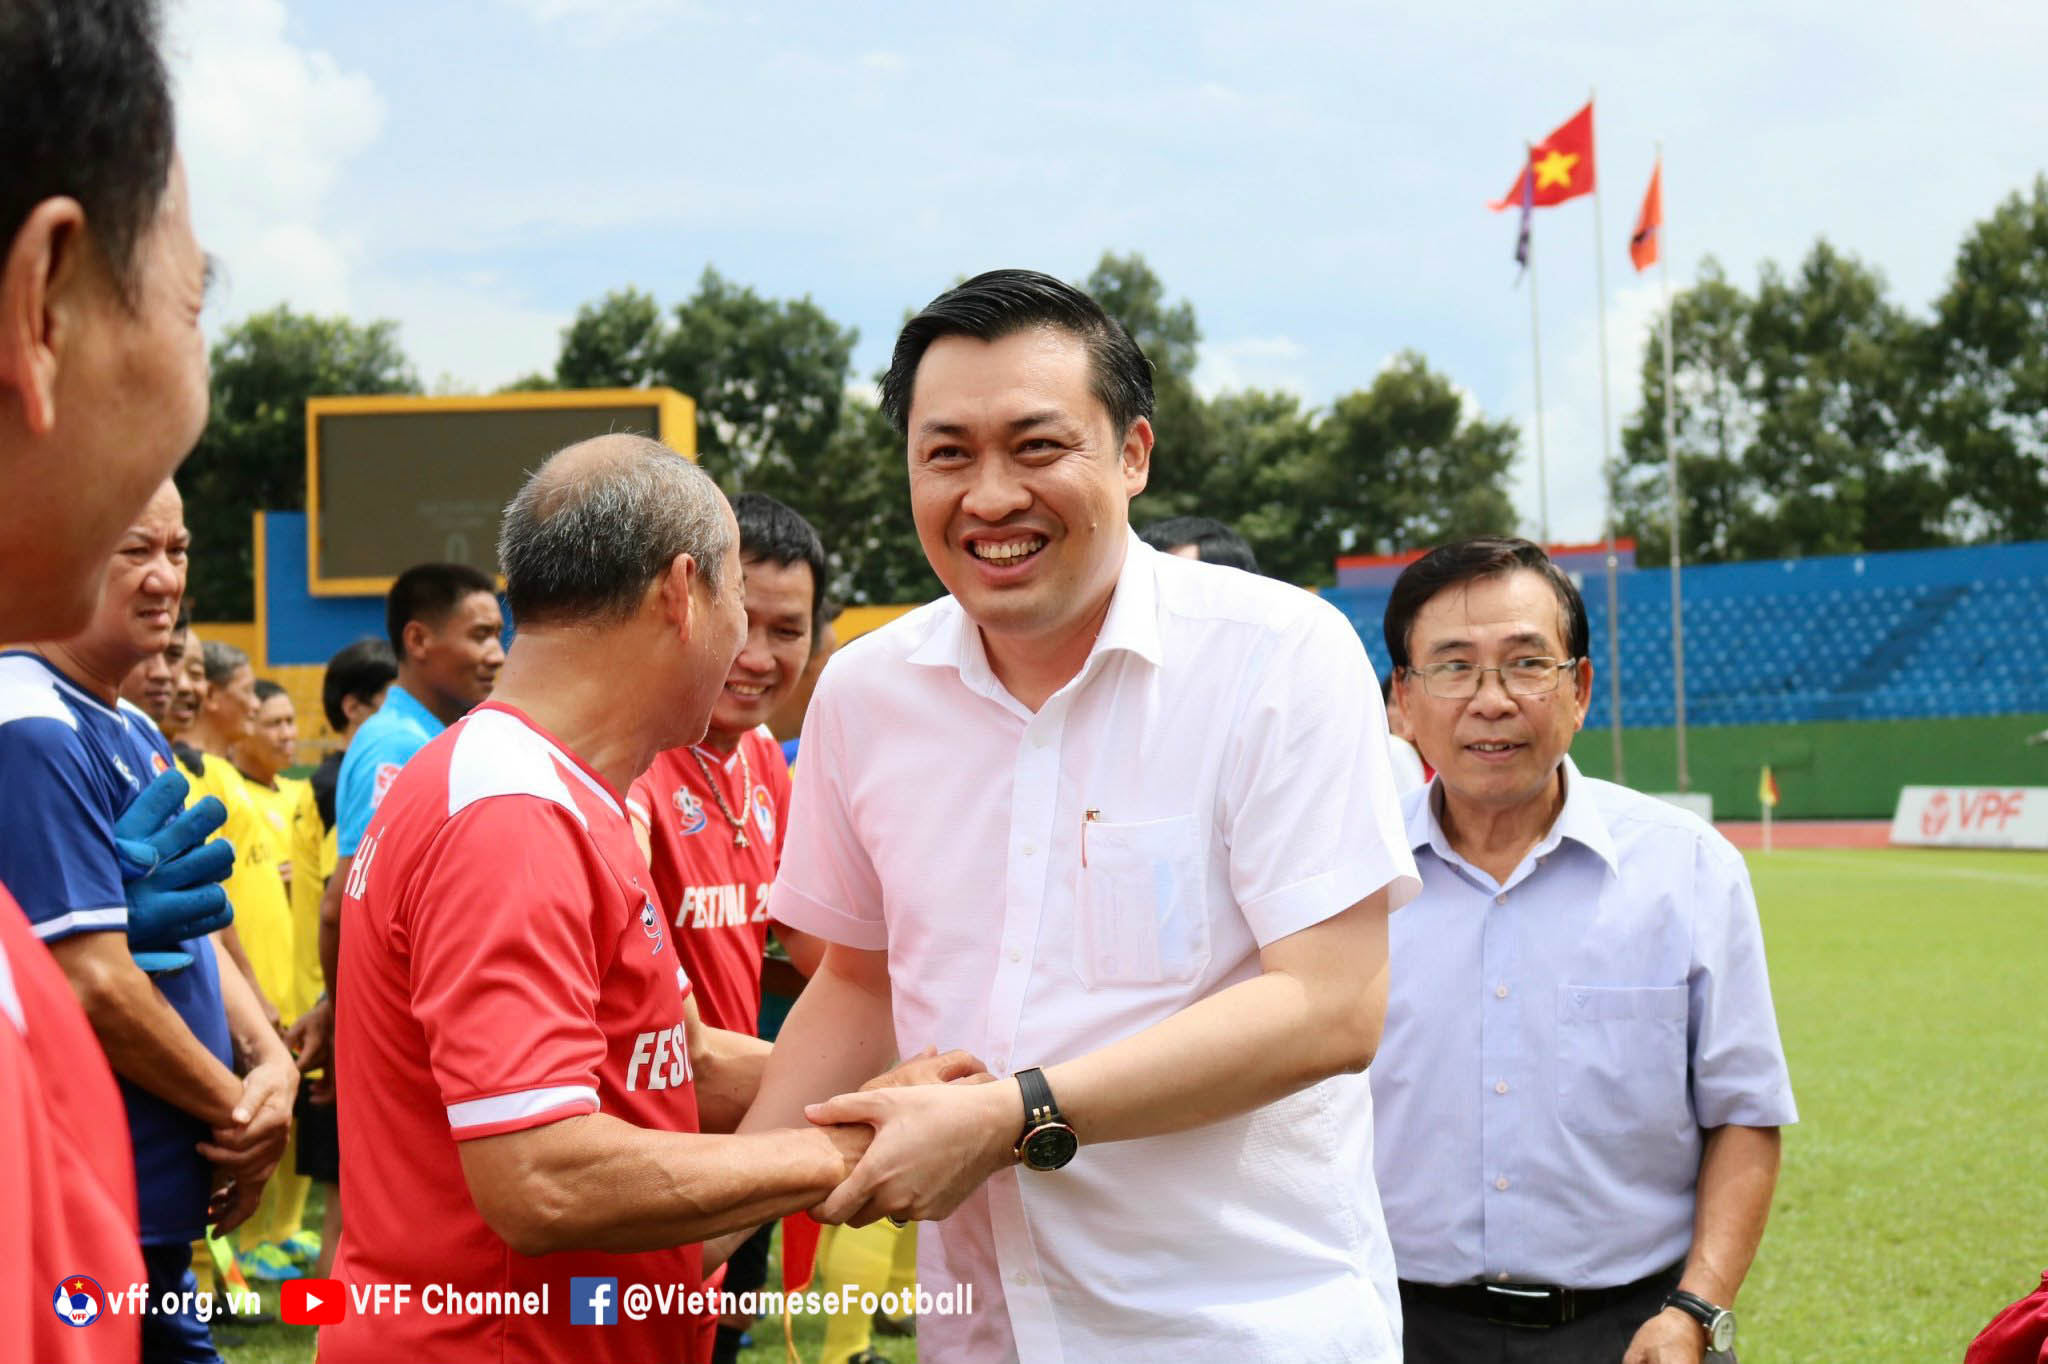 Mr. Cao Wenchong, vice chairman of VFF and head of the organizing committee, shook hands to welcome former players from the North, Central and South regions to participate.